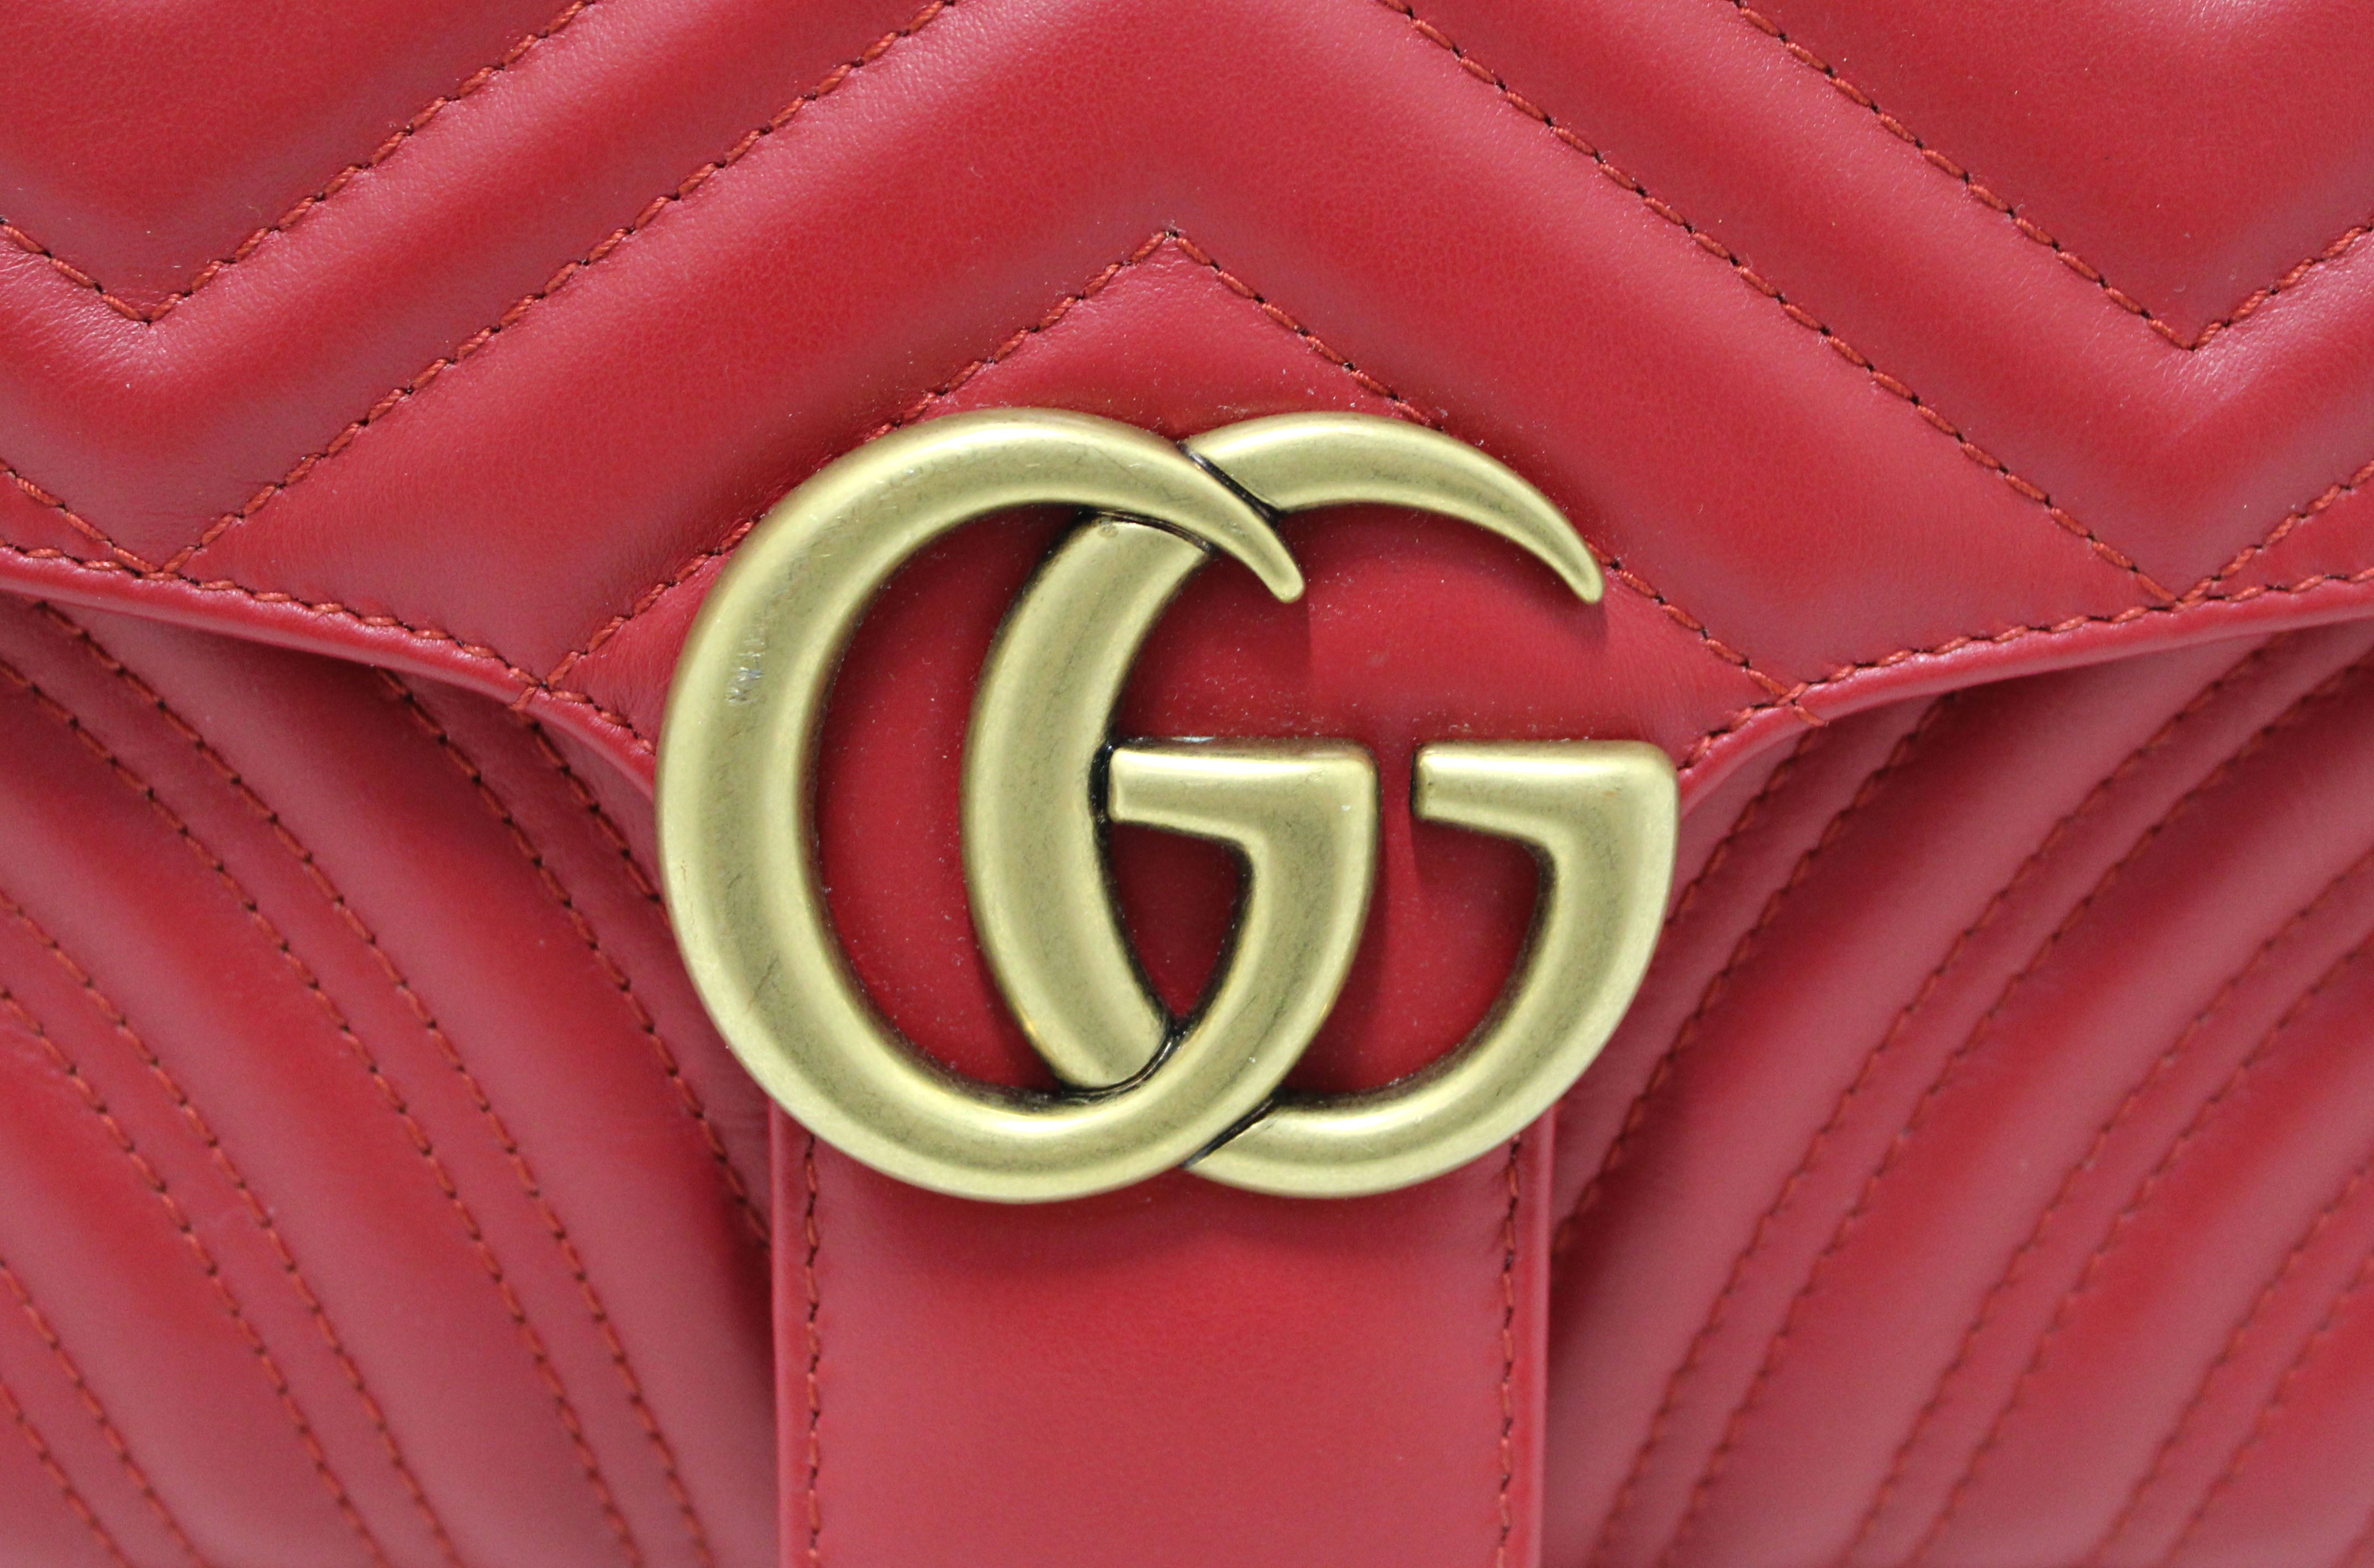 Authentic Gucci GG Red Marmont Small Matelassé Leather Shoulder Bag